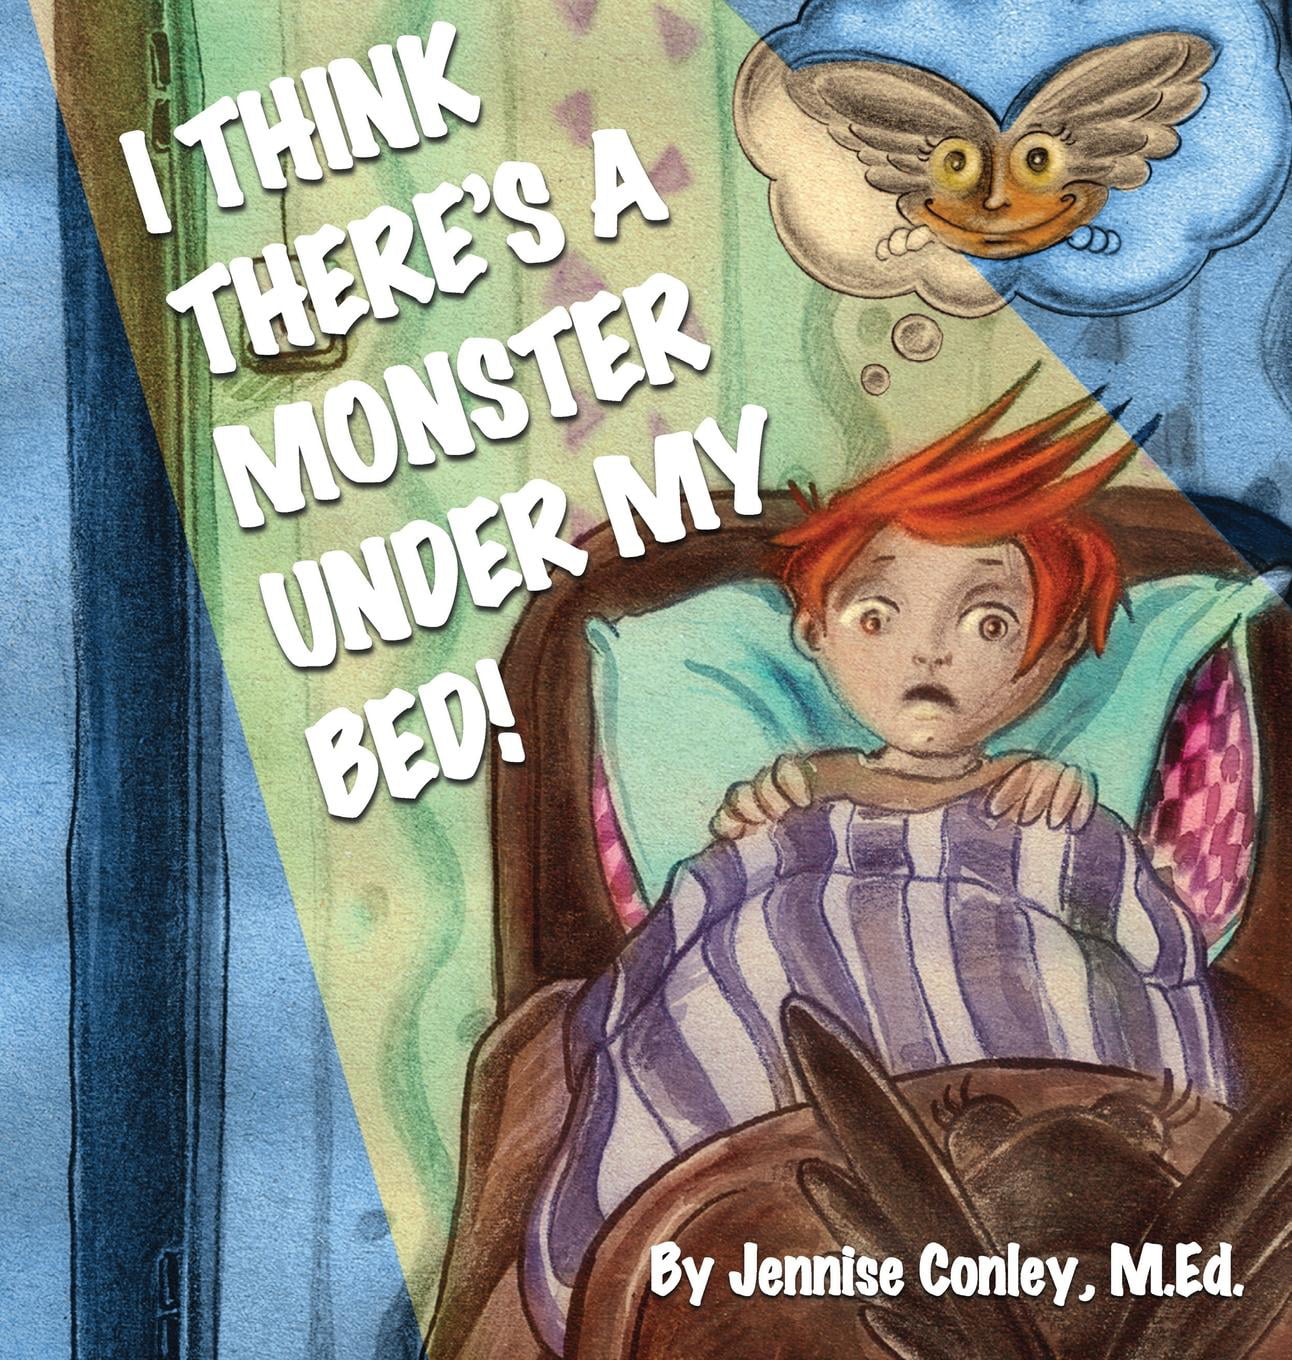 I Think There's a Monster Under My Bed! (Hardcover) - Walmart.com